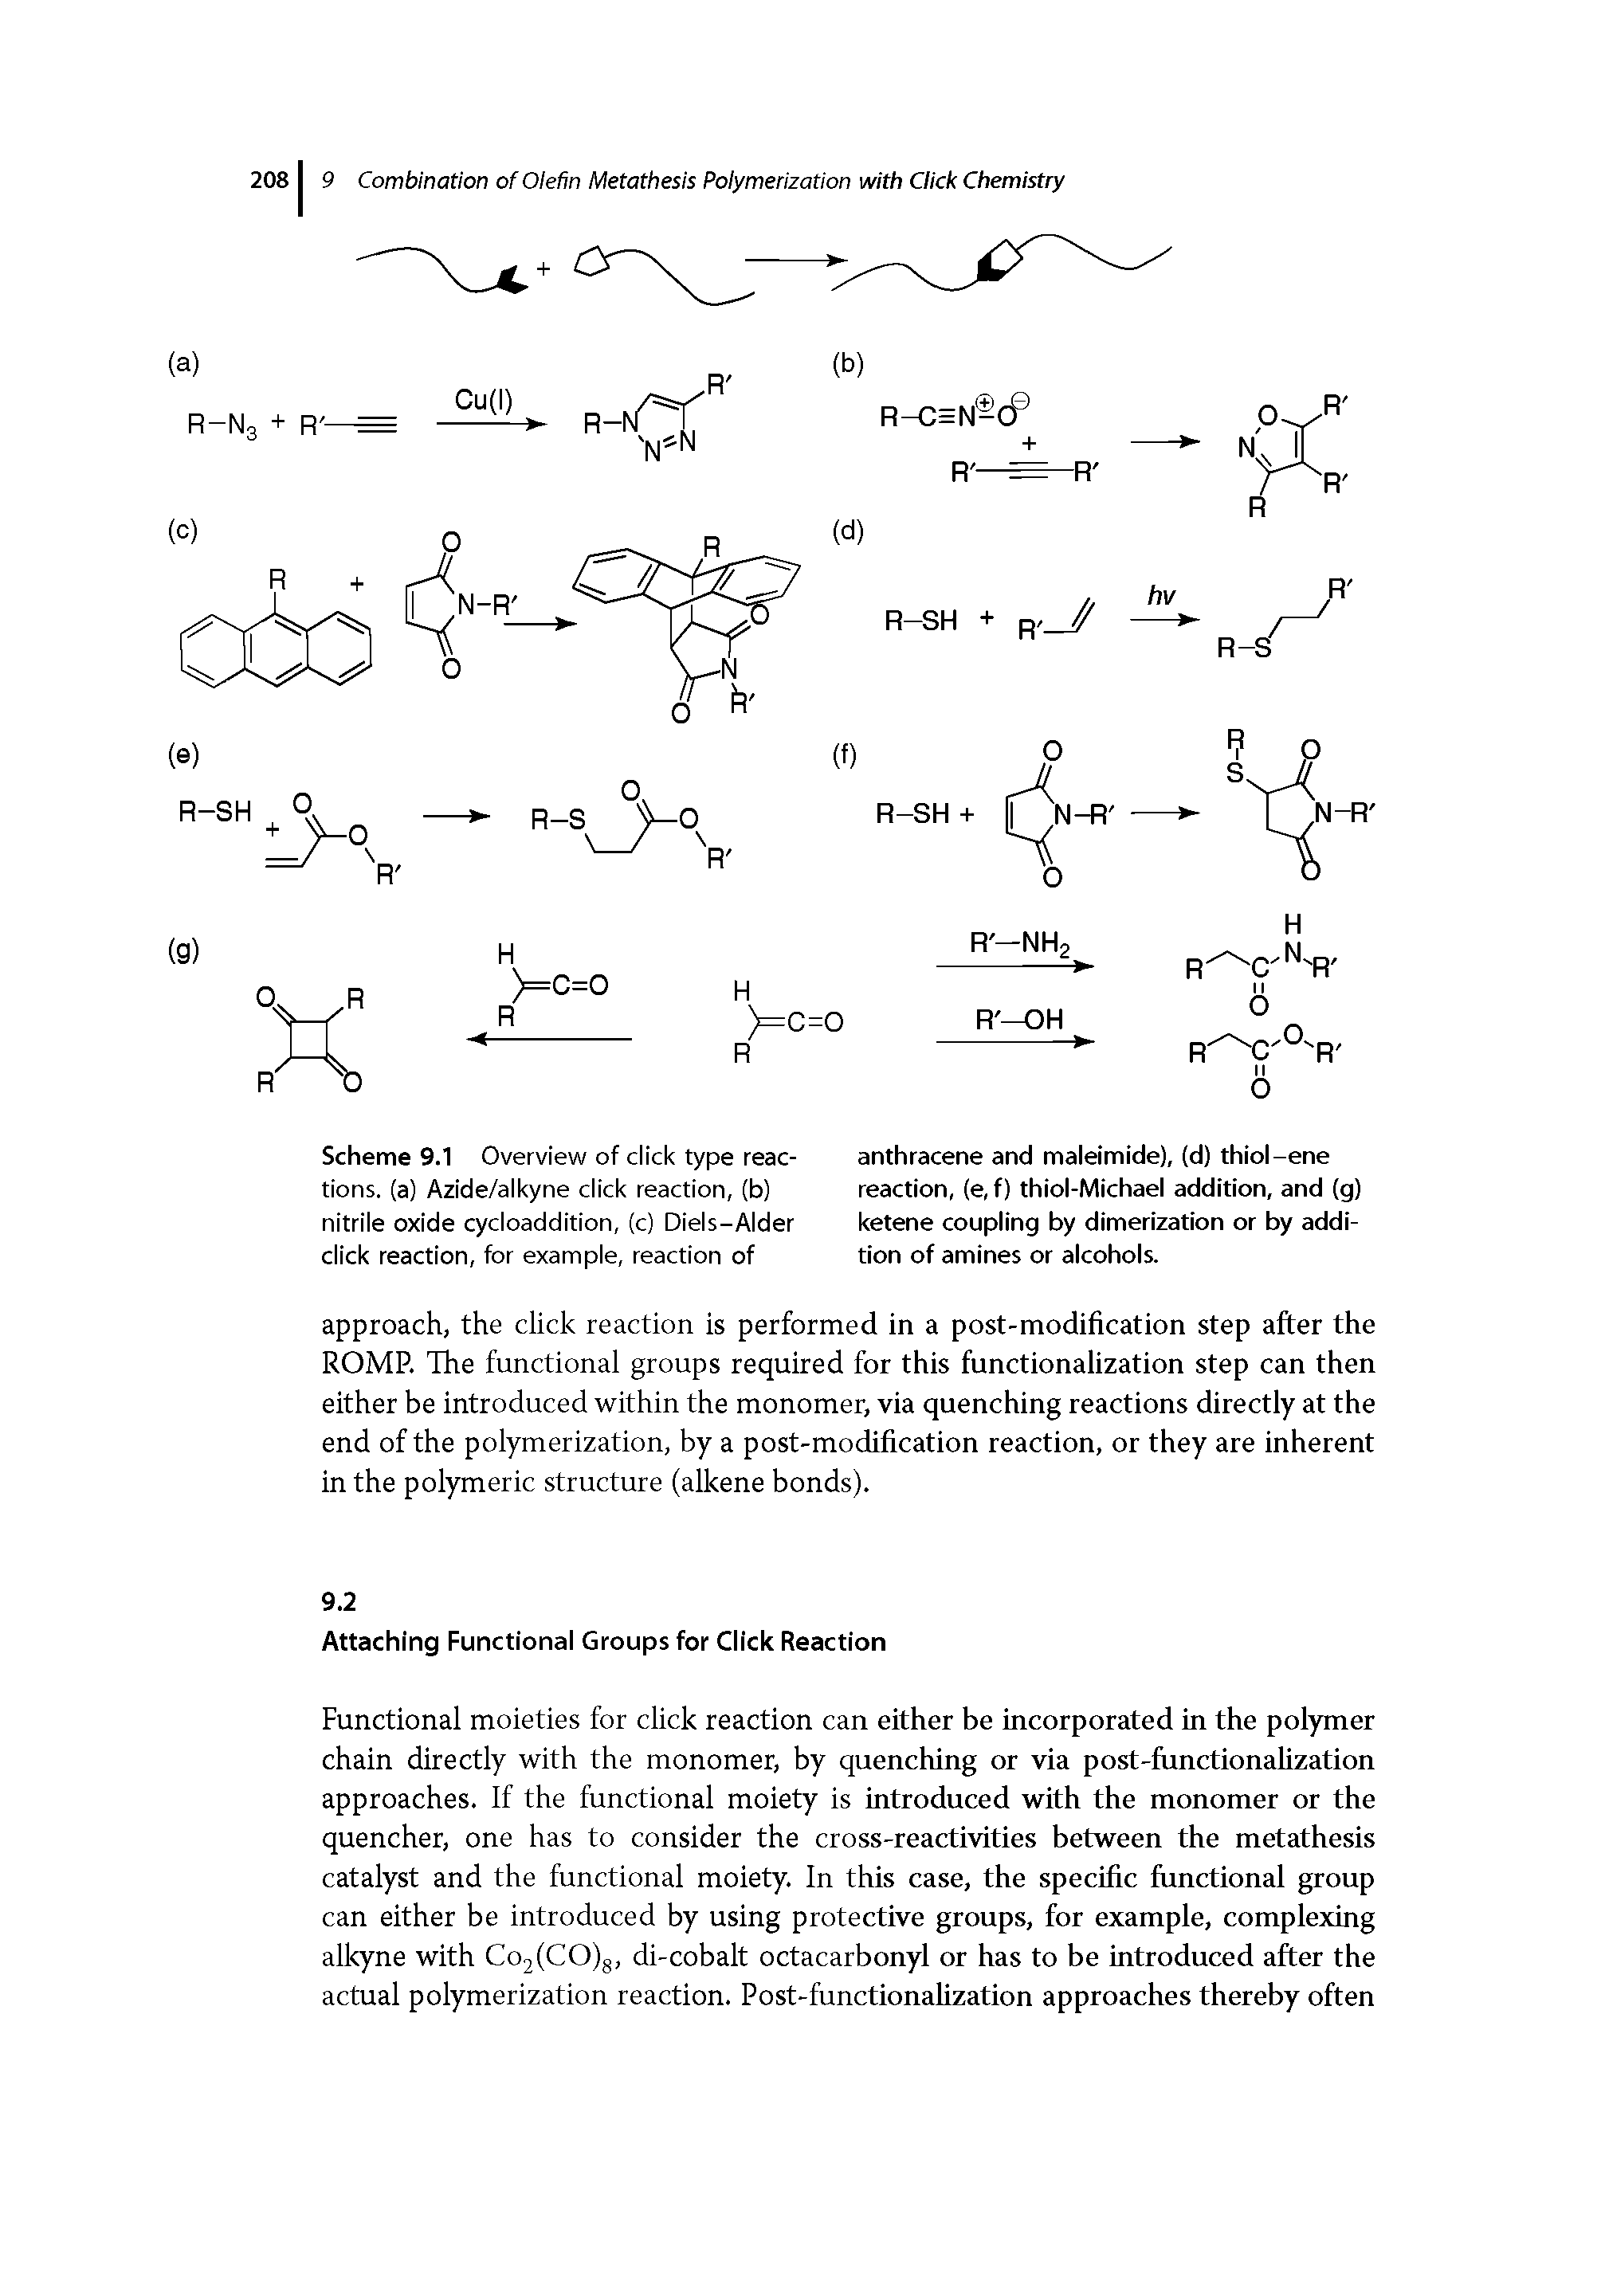 Scheme 9.1 Overview of click type reactions. (a) Azide/alkyne click reaction, (b) nitrile oxide cycloaddition, (c) Diels-Alder click reaction, for example, reaction of...